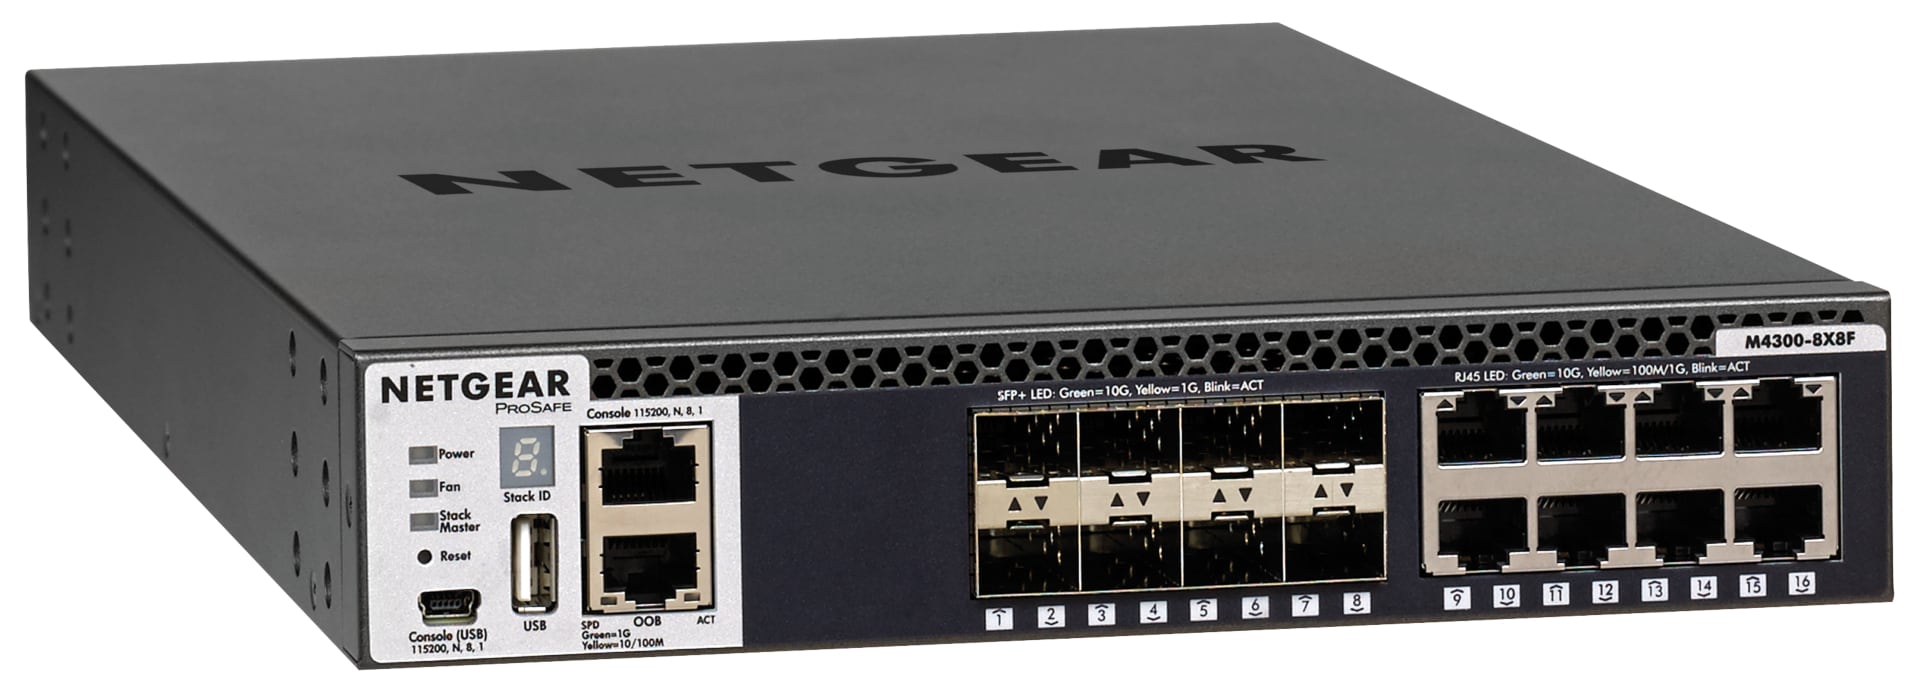 Netgear M4300 Stackable Managed Switch with 16x10G Including 8x10GBASE-T and 8xSFP+ Layer 3